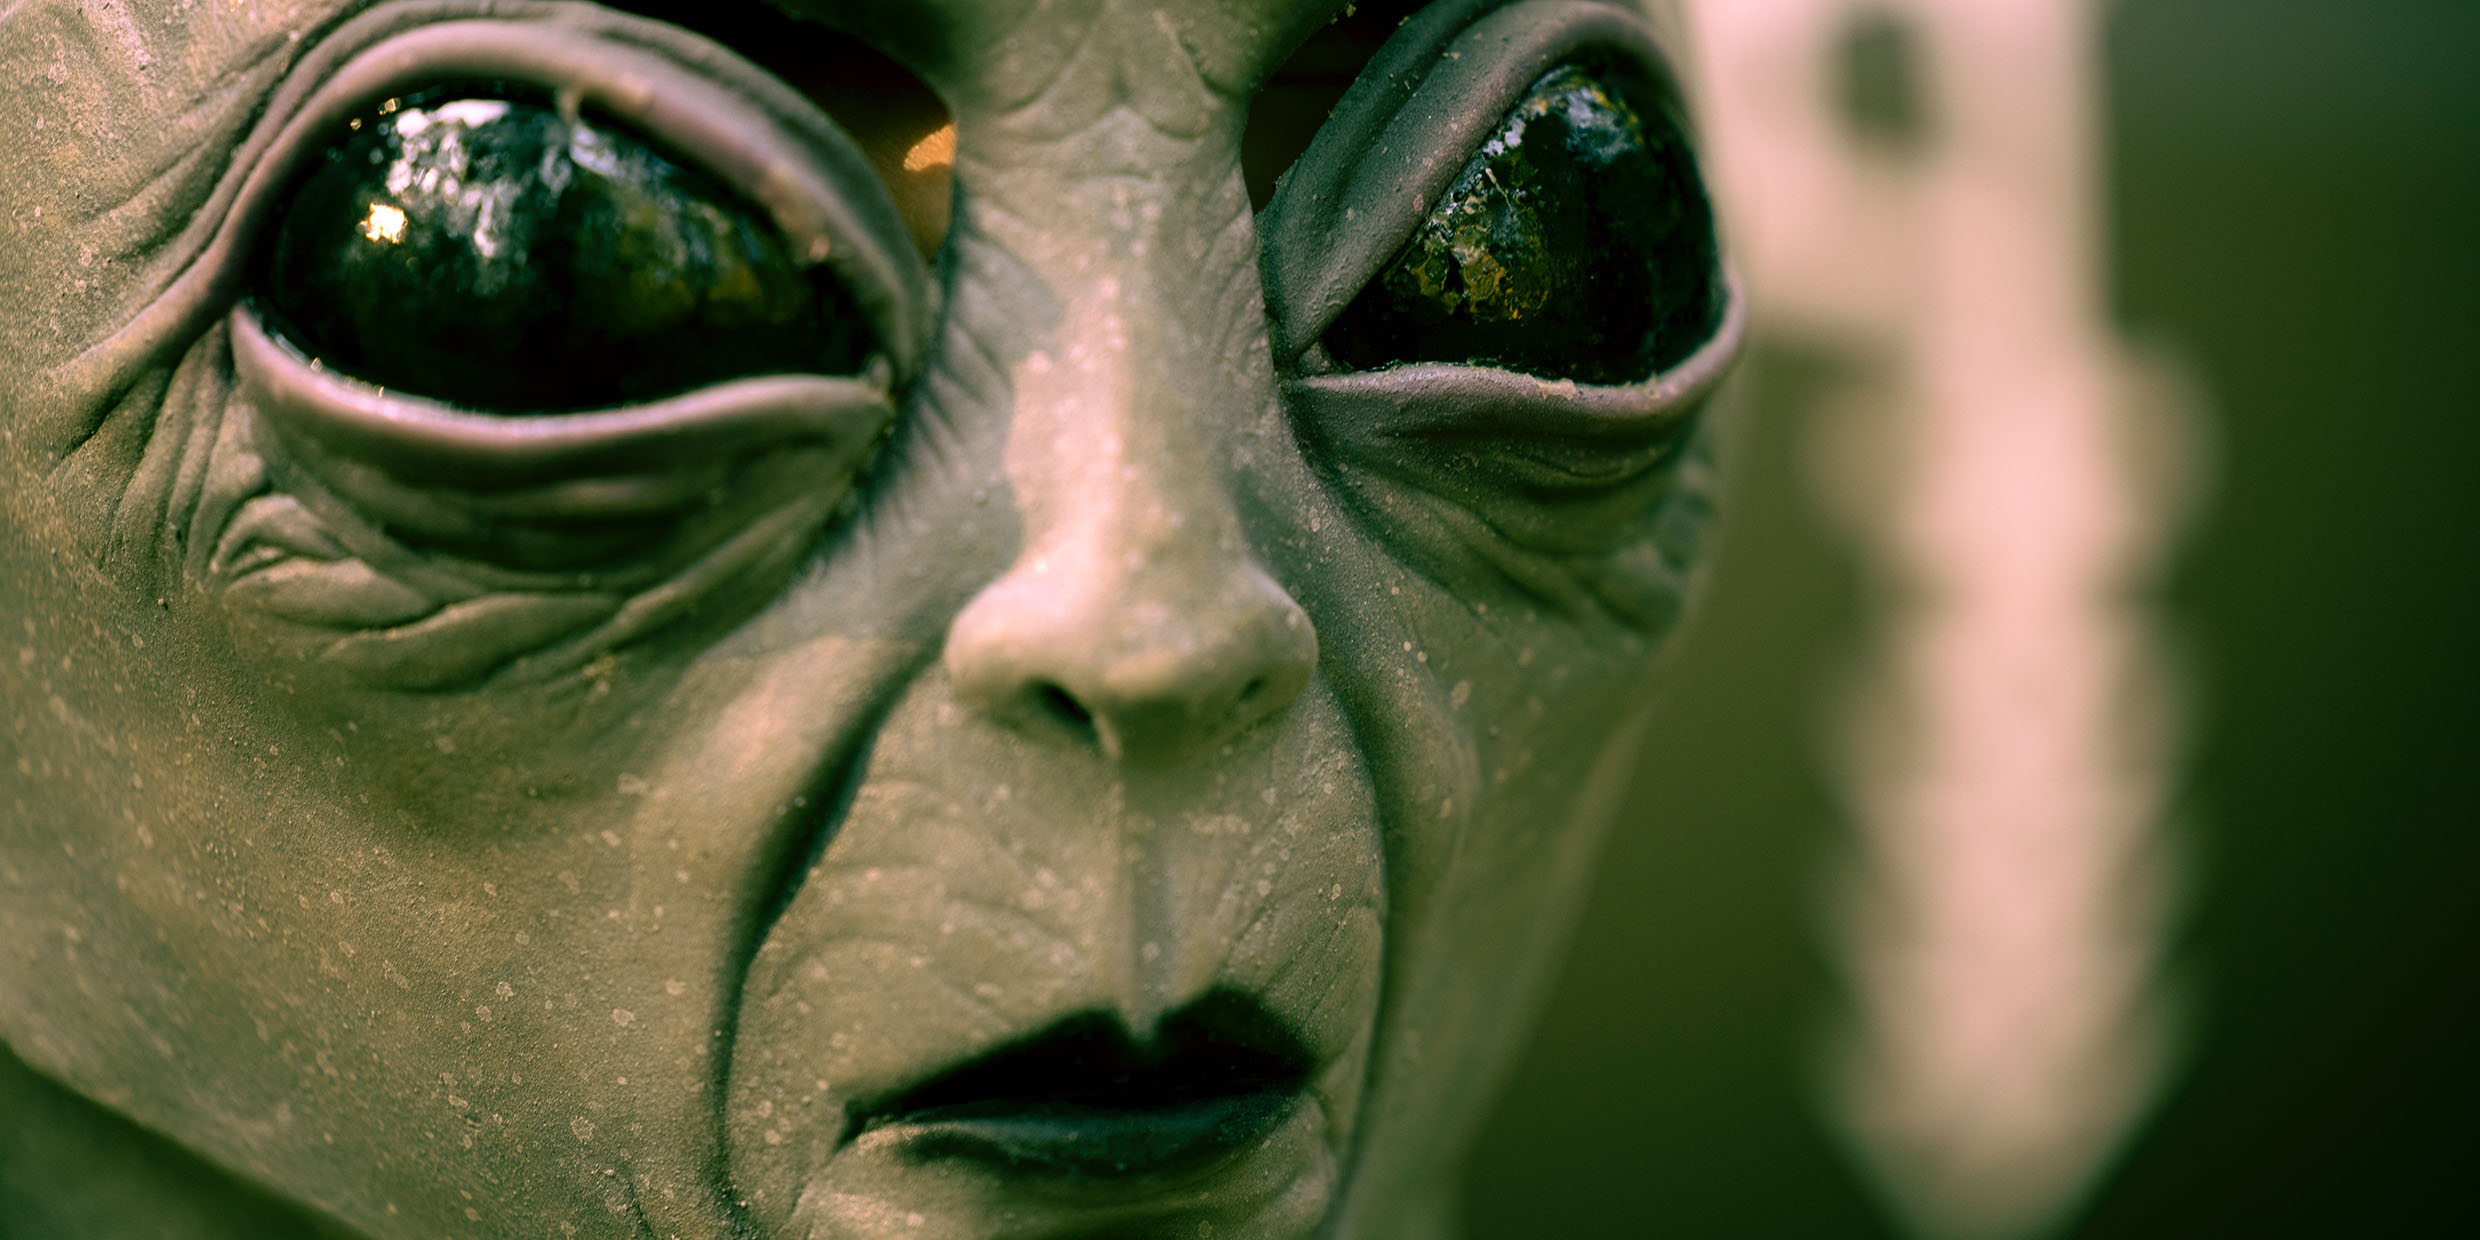 Image of a model of a stereotypical "space alien"